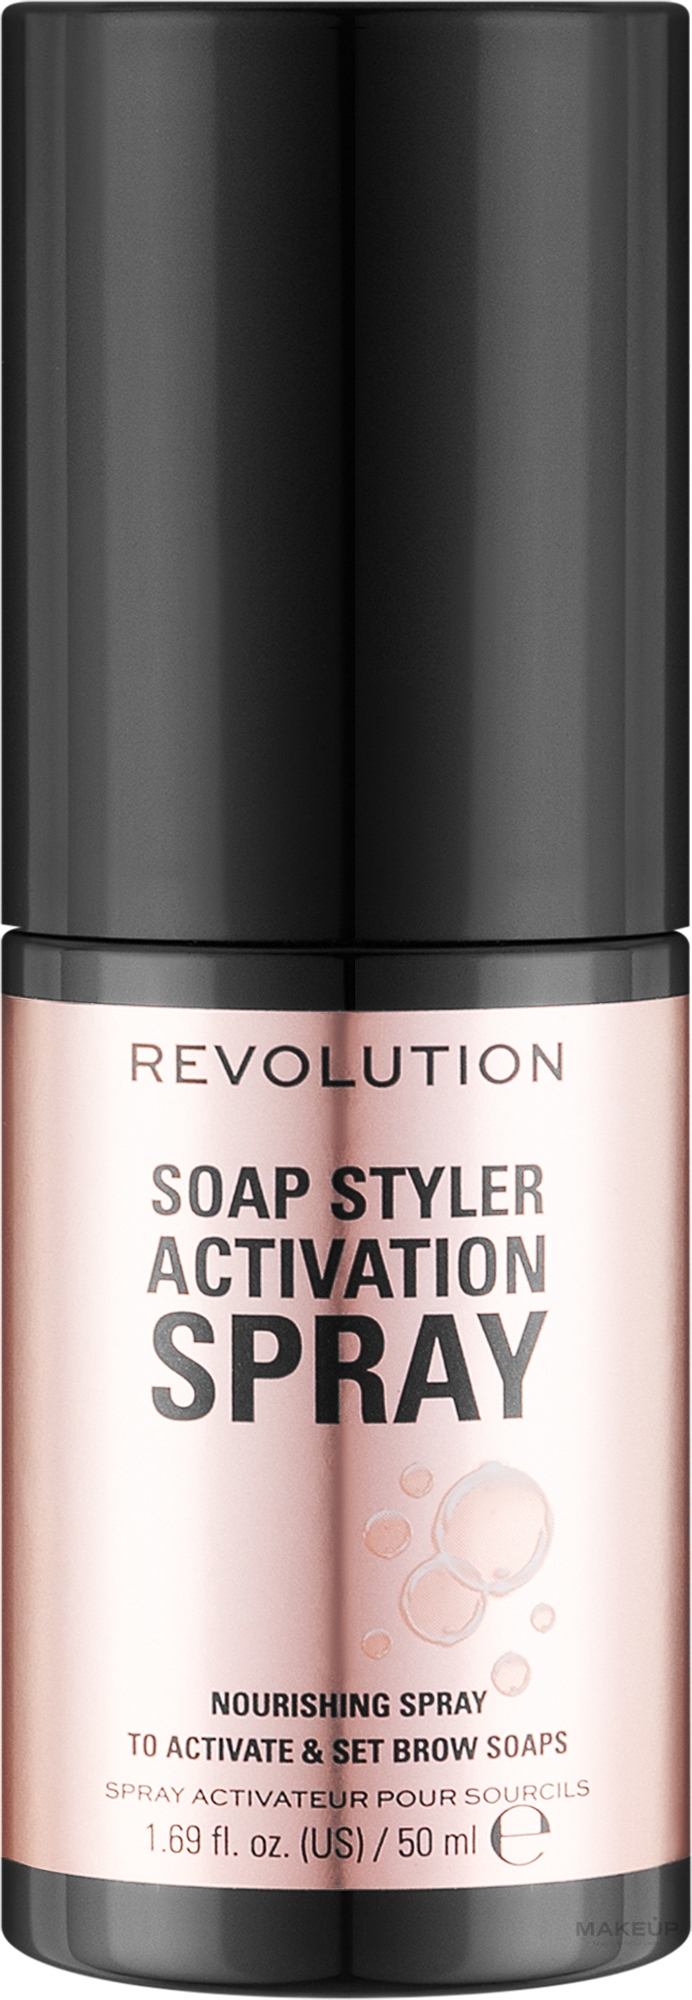 Activator Spray for Hair Styling - Makeup Revolution Soap Styler Activating Spray  — photo 50 ml